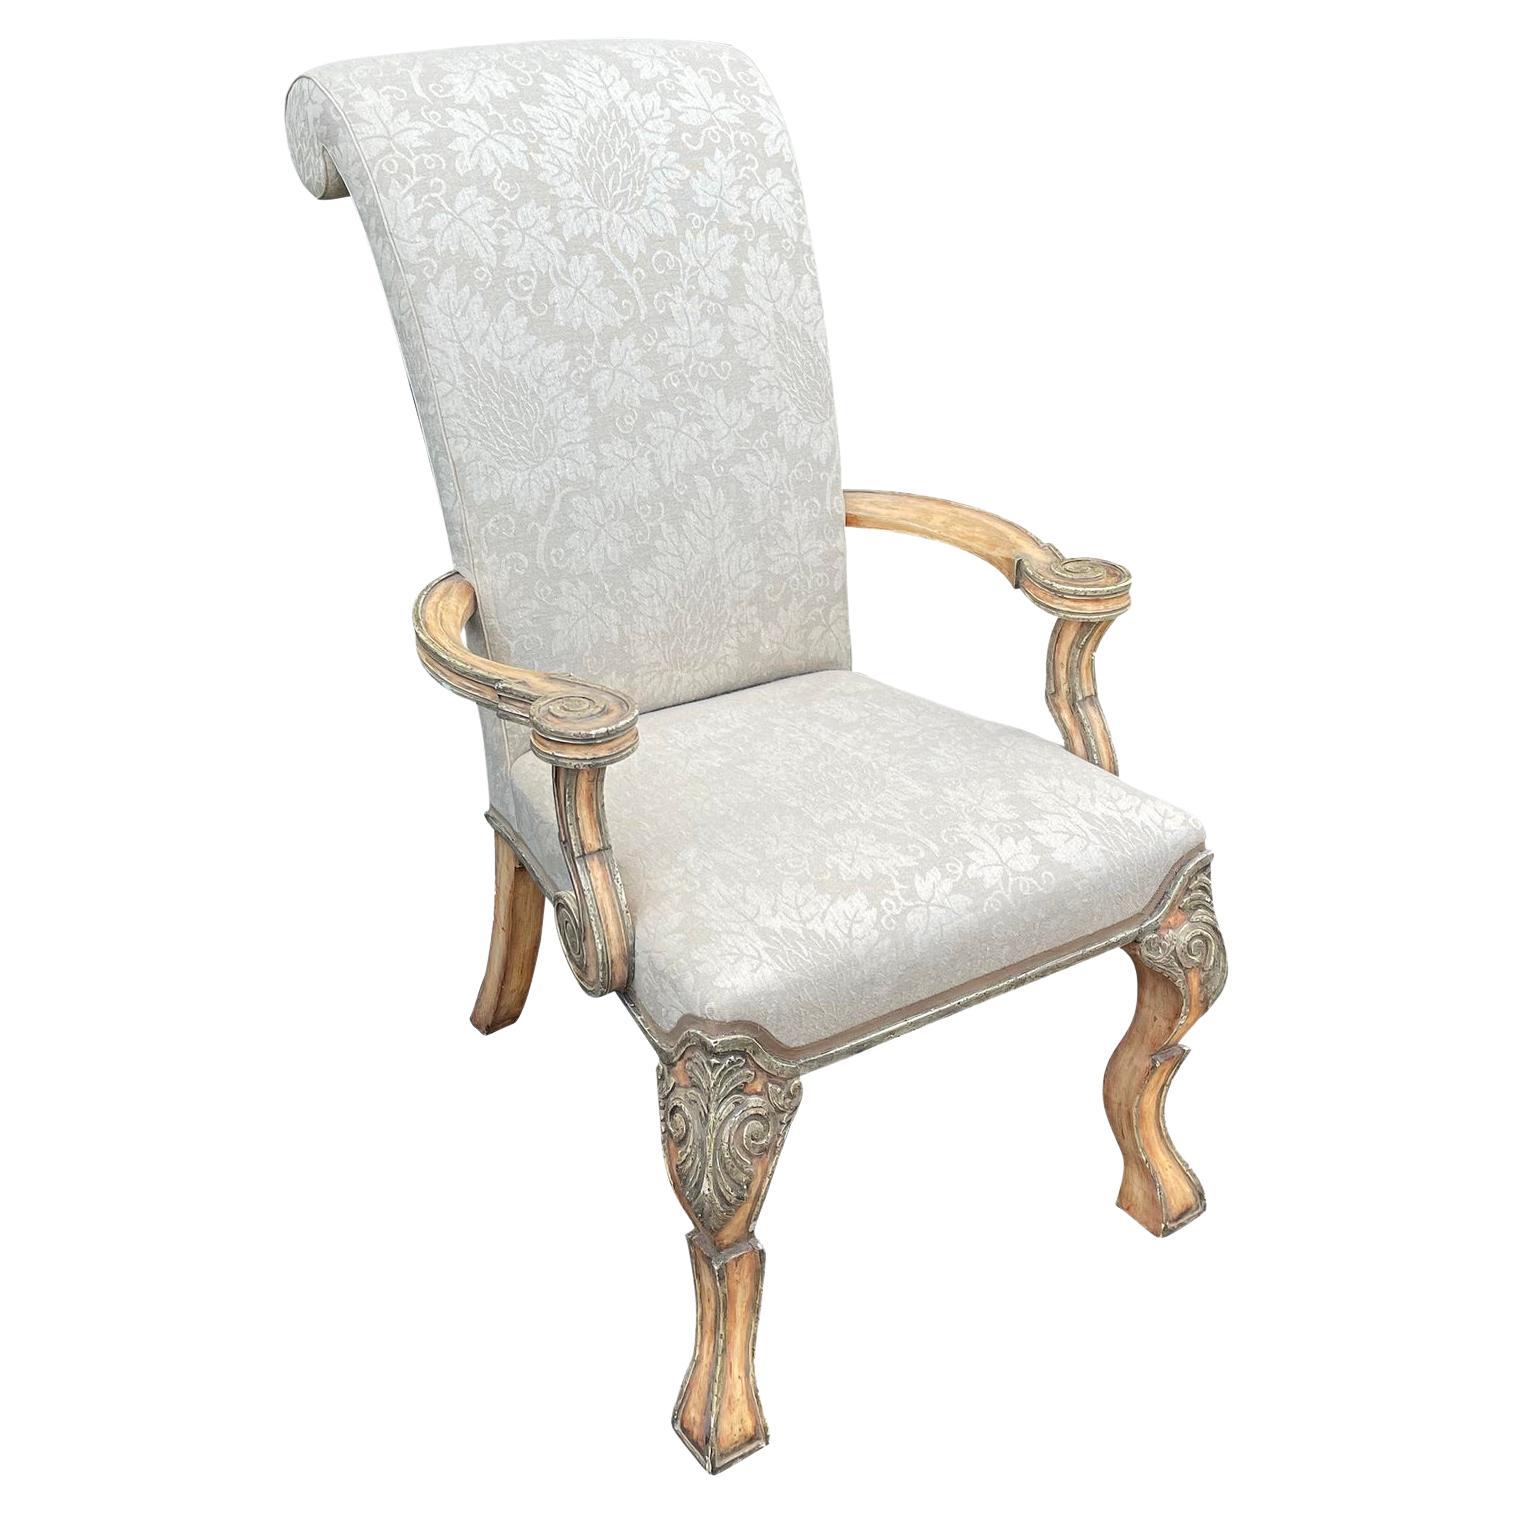 Minton-Spidell 18th Century Style Carved Italian Armchair